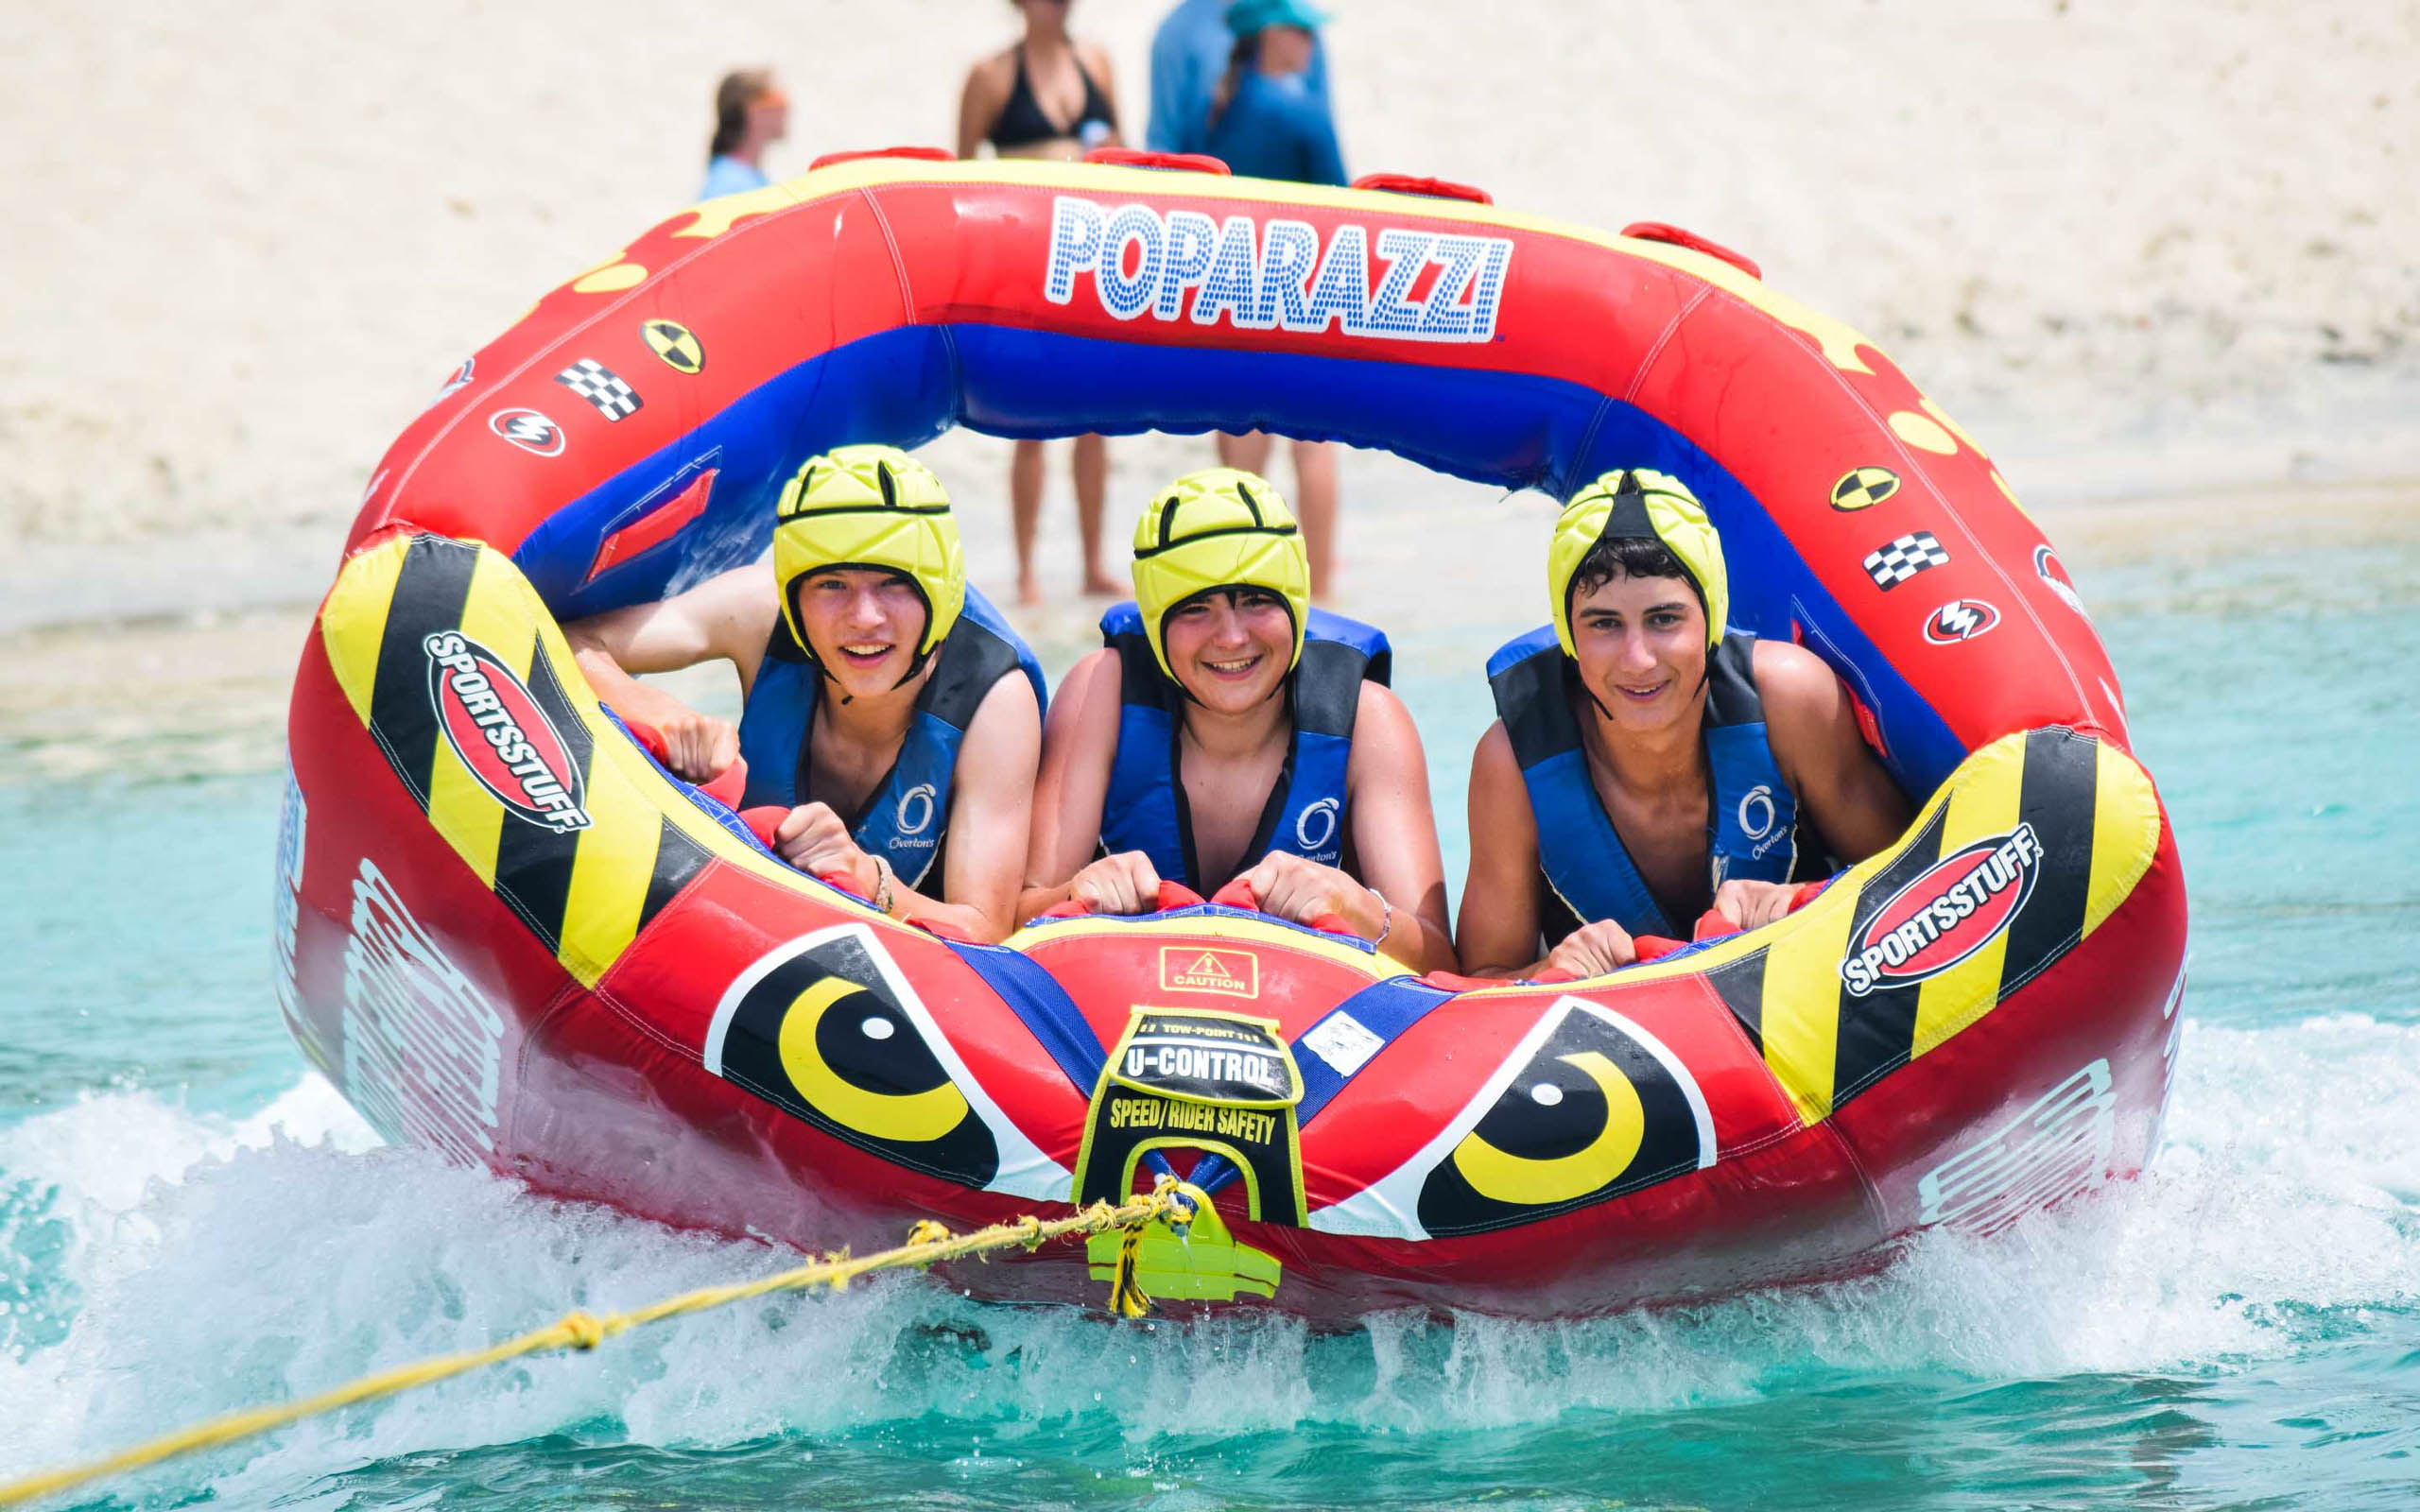 A group of people riding in an inflatable raft on the water.